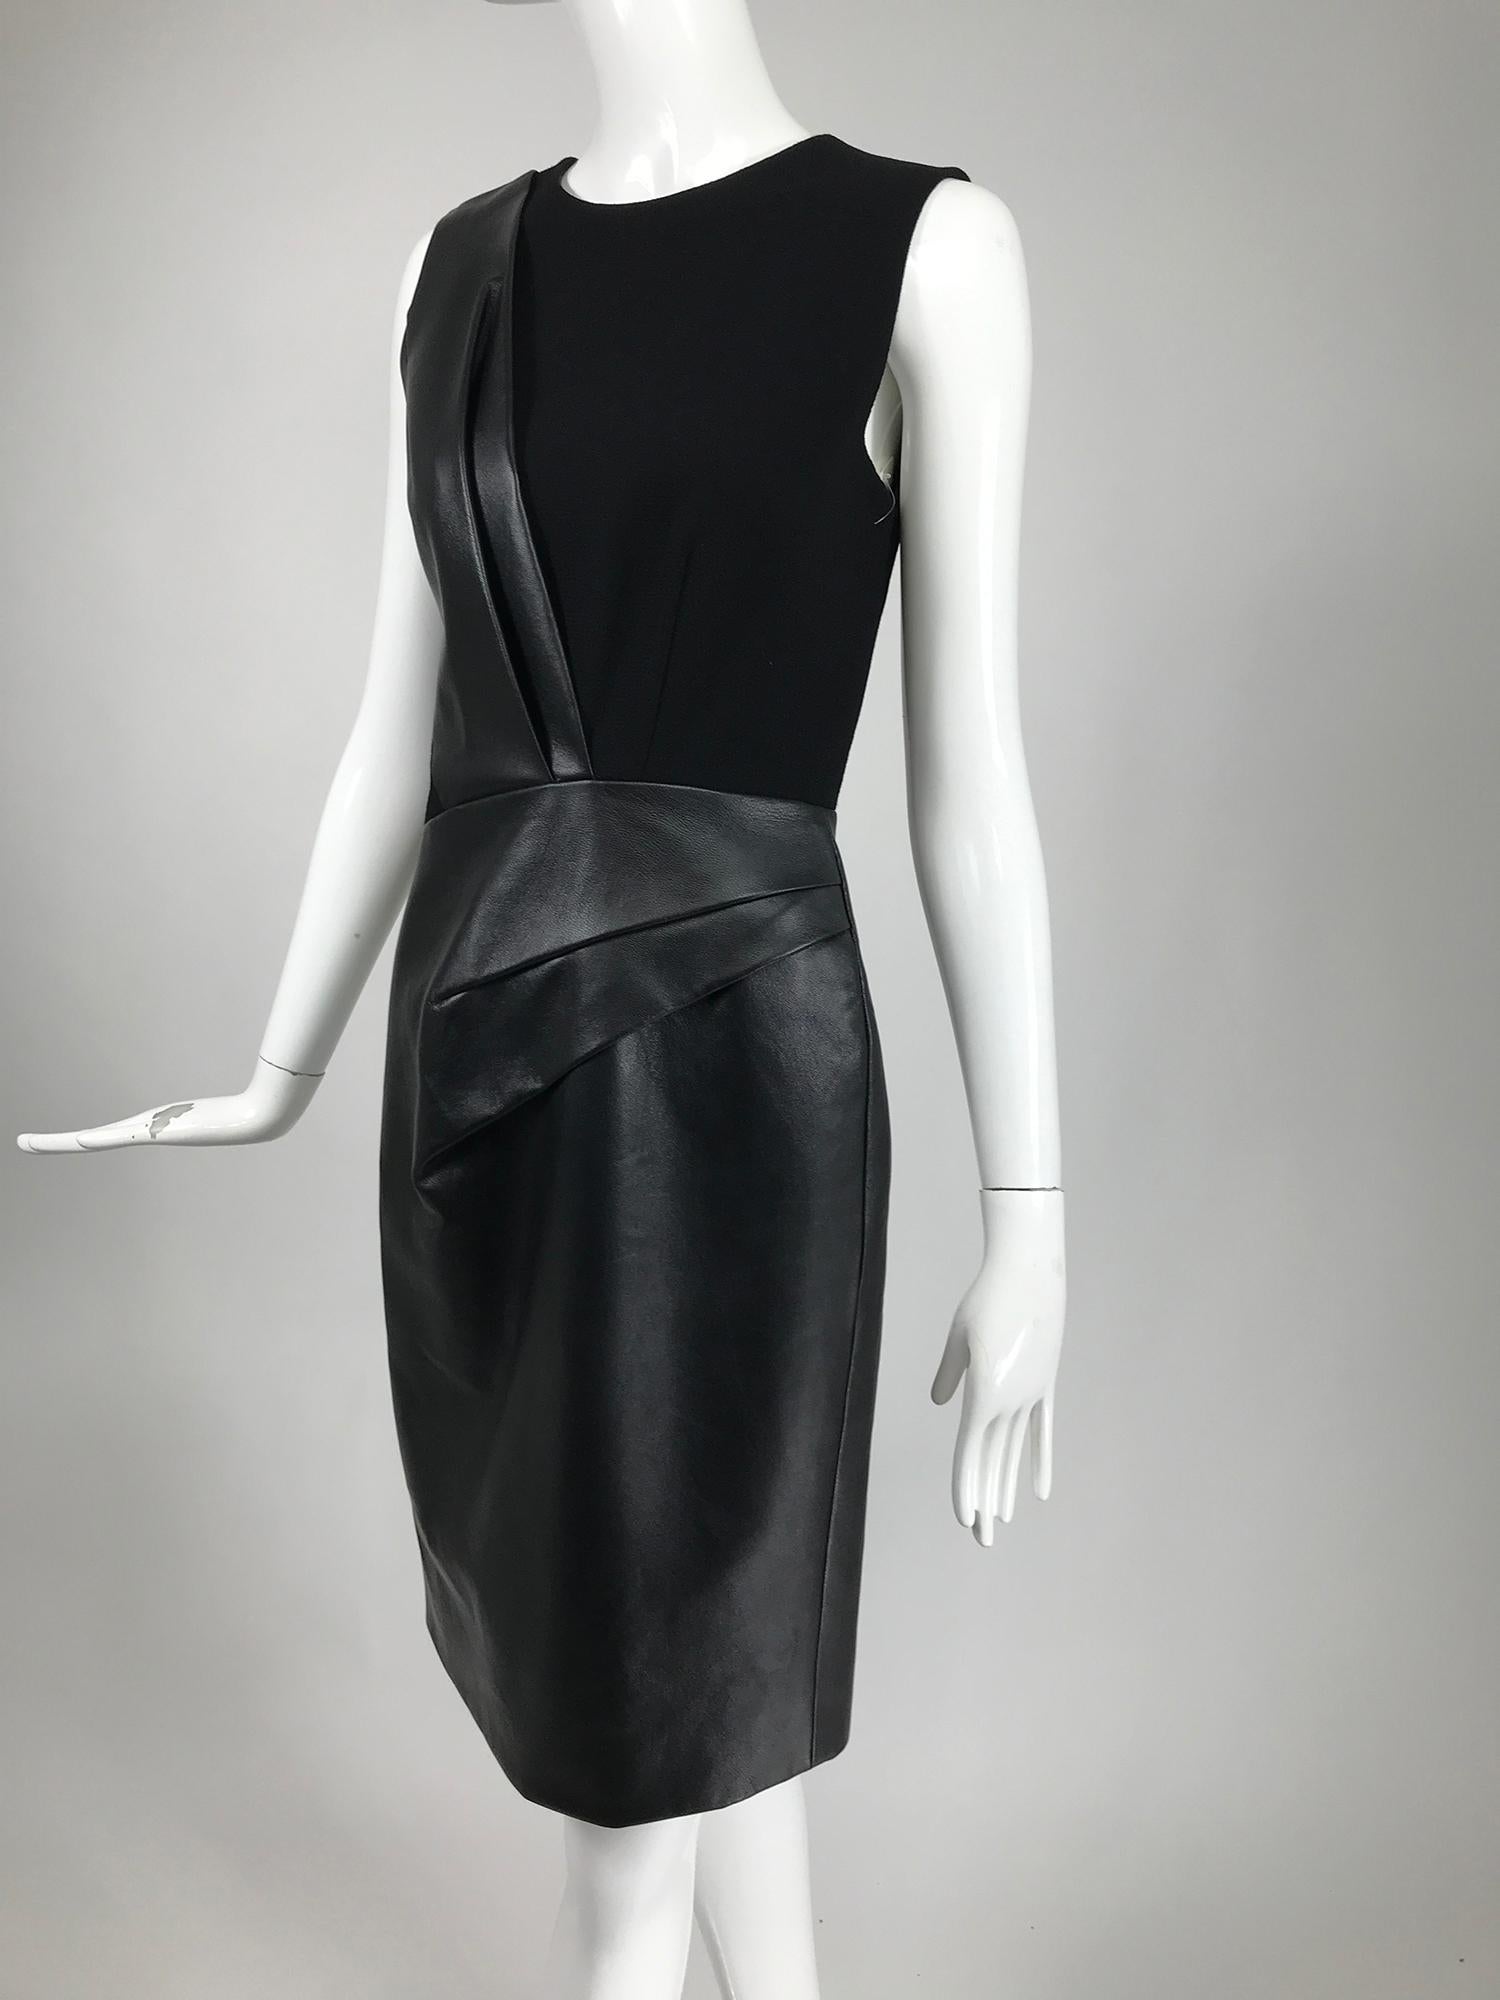 J. Mendel Paris back wool & leather sheath dress. Sleeveless, jewel neckline dress with an interesting mix of glazed black leather at the side front where it is vertically darted, the dress has an angled waist. The skirt is black leather with side